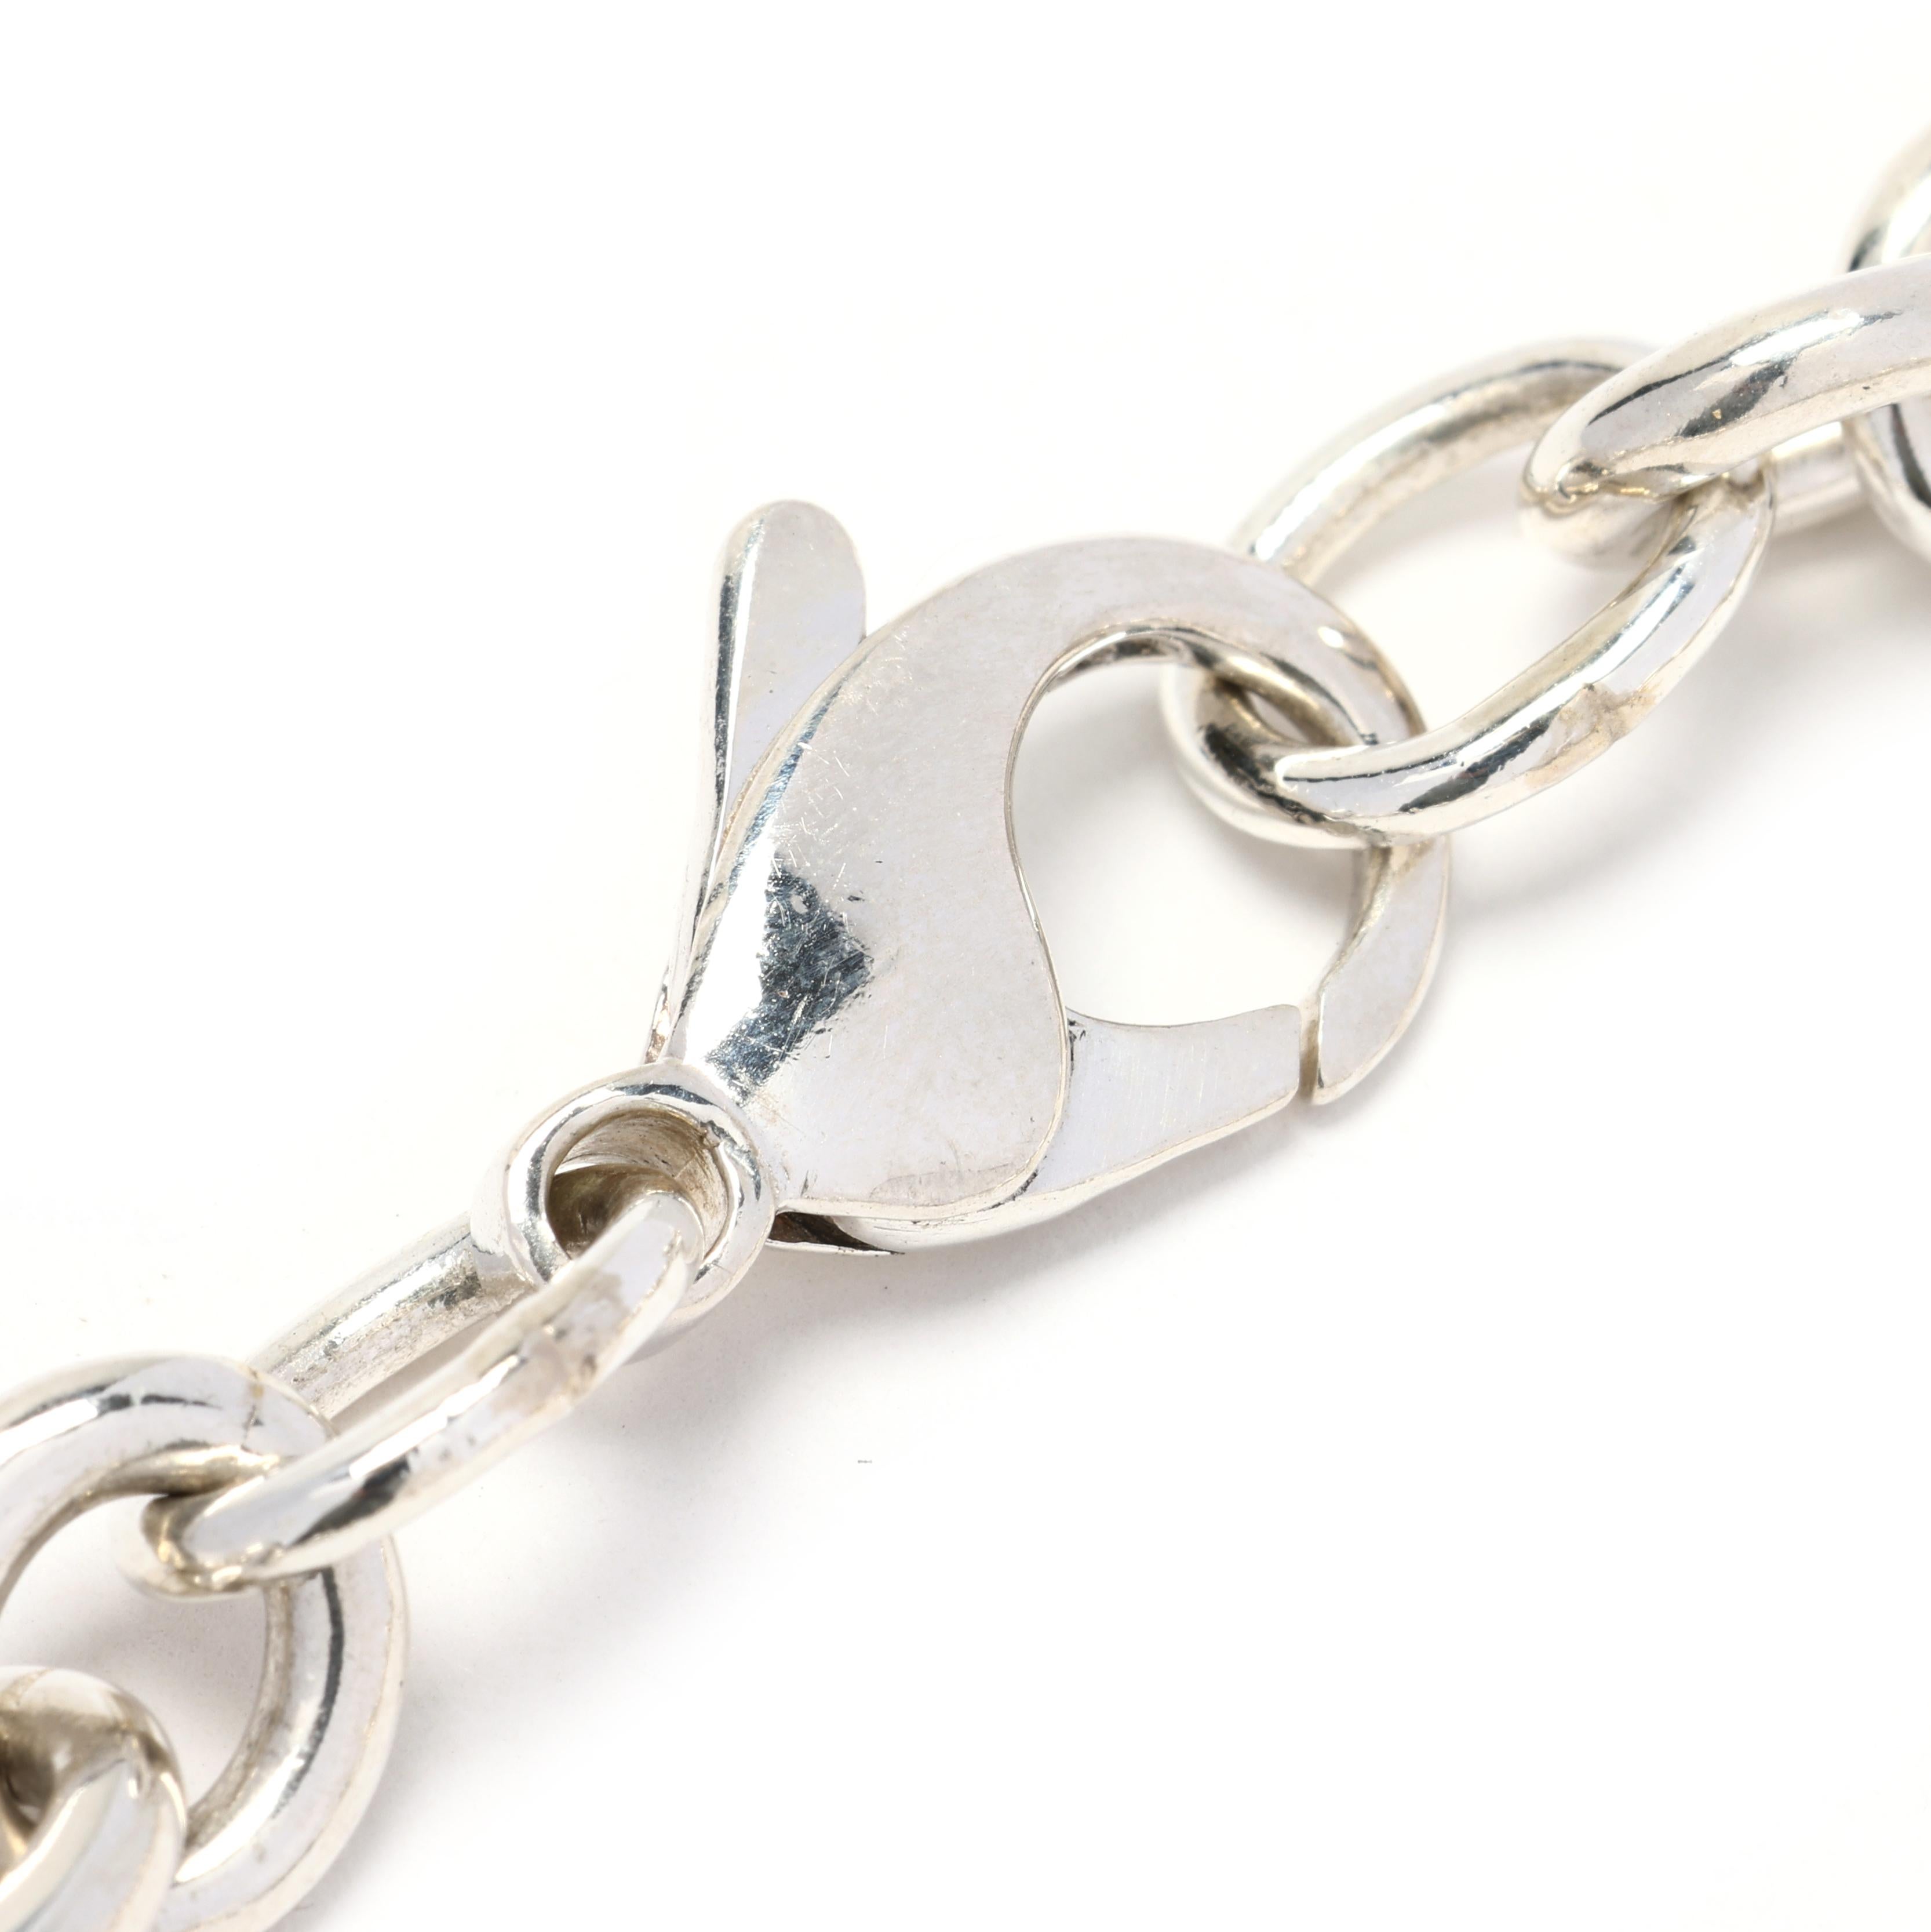 Tiffany and Co Heart Chain Bracelet, Sterling Silver, Length 7 Inches, Designer In Good Condition For Sale In McLeansville, NC